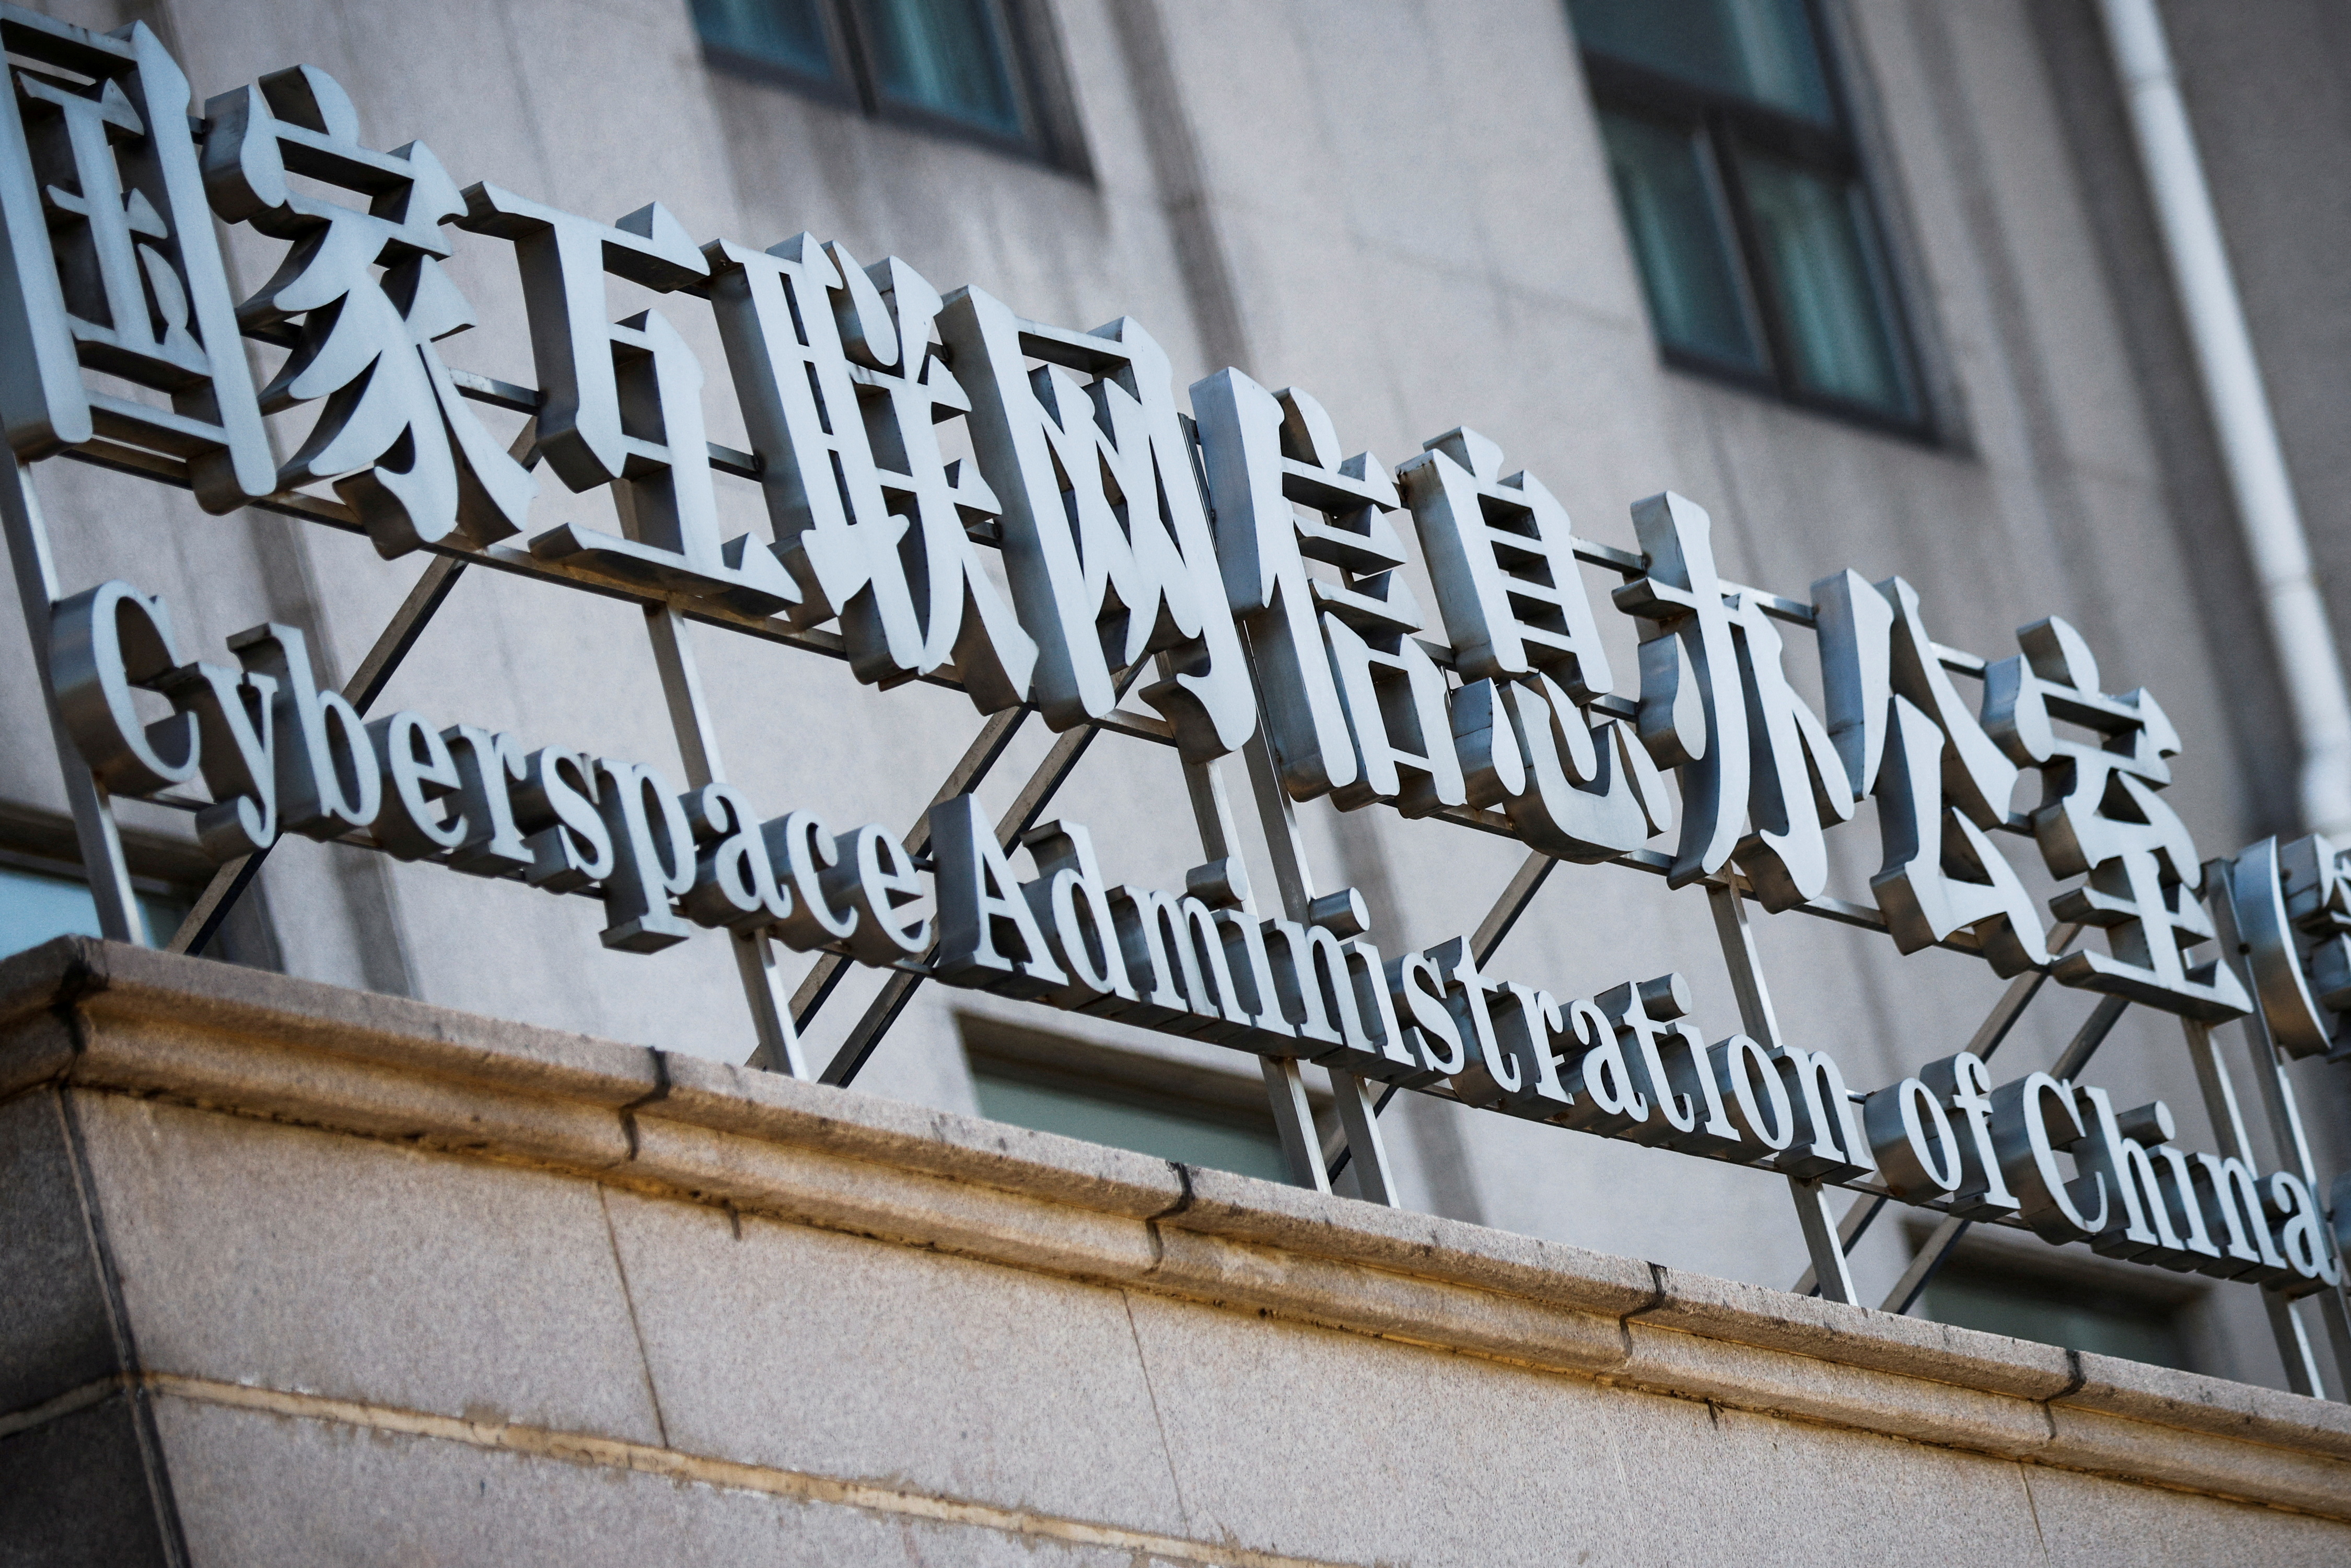 FILE PHOTO: A sign above an office of the Cyberspace Administration of China (CAC) is seen in Beijing, China July 8, 2021. REUTERS/Thomas Peter//File Photo